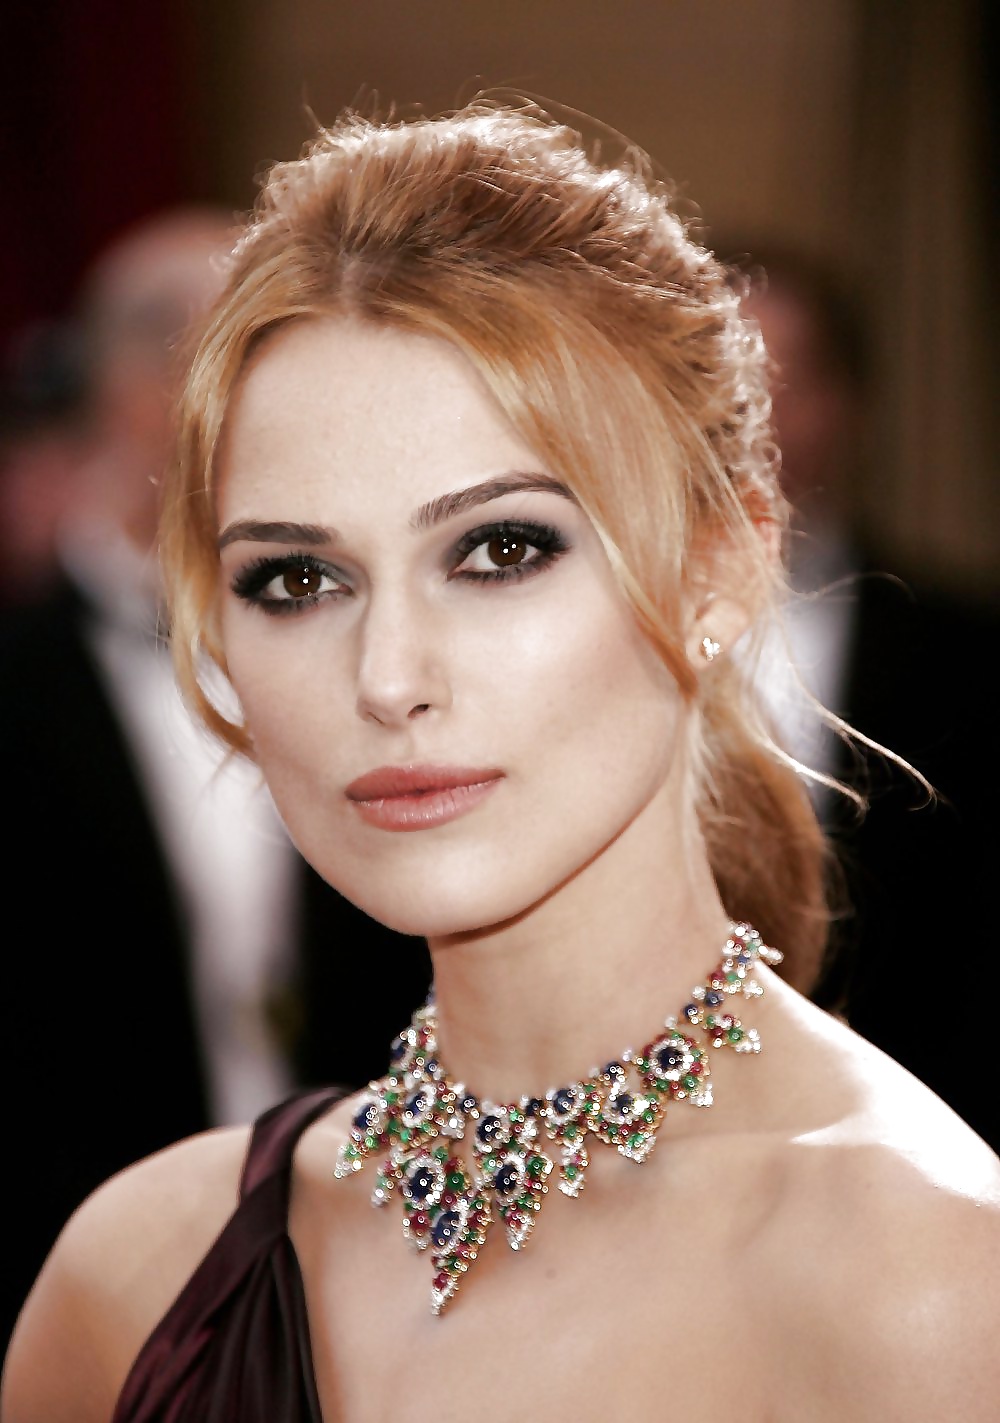 Keira Knightley The Royal Lady of England #35650123